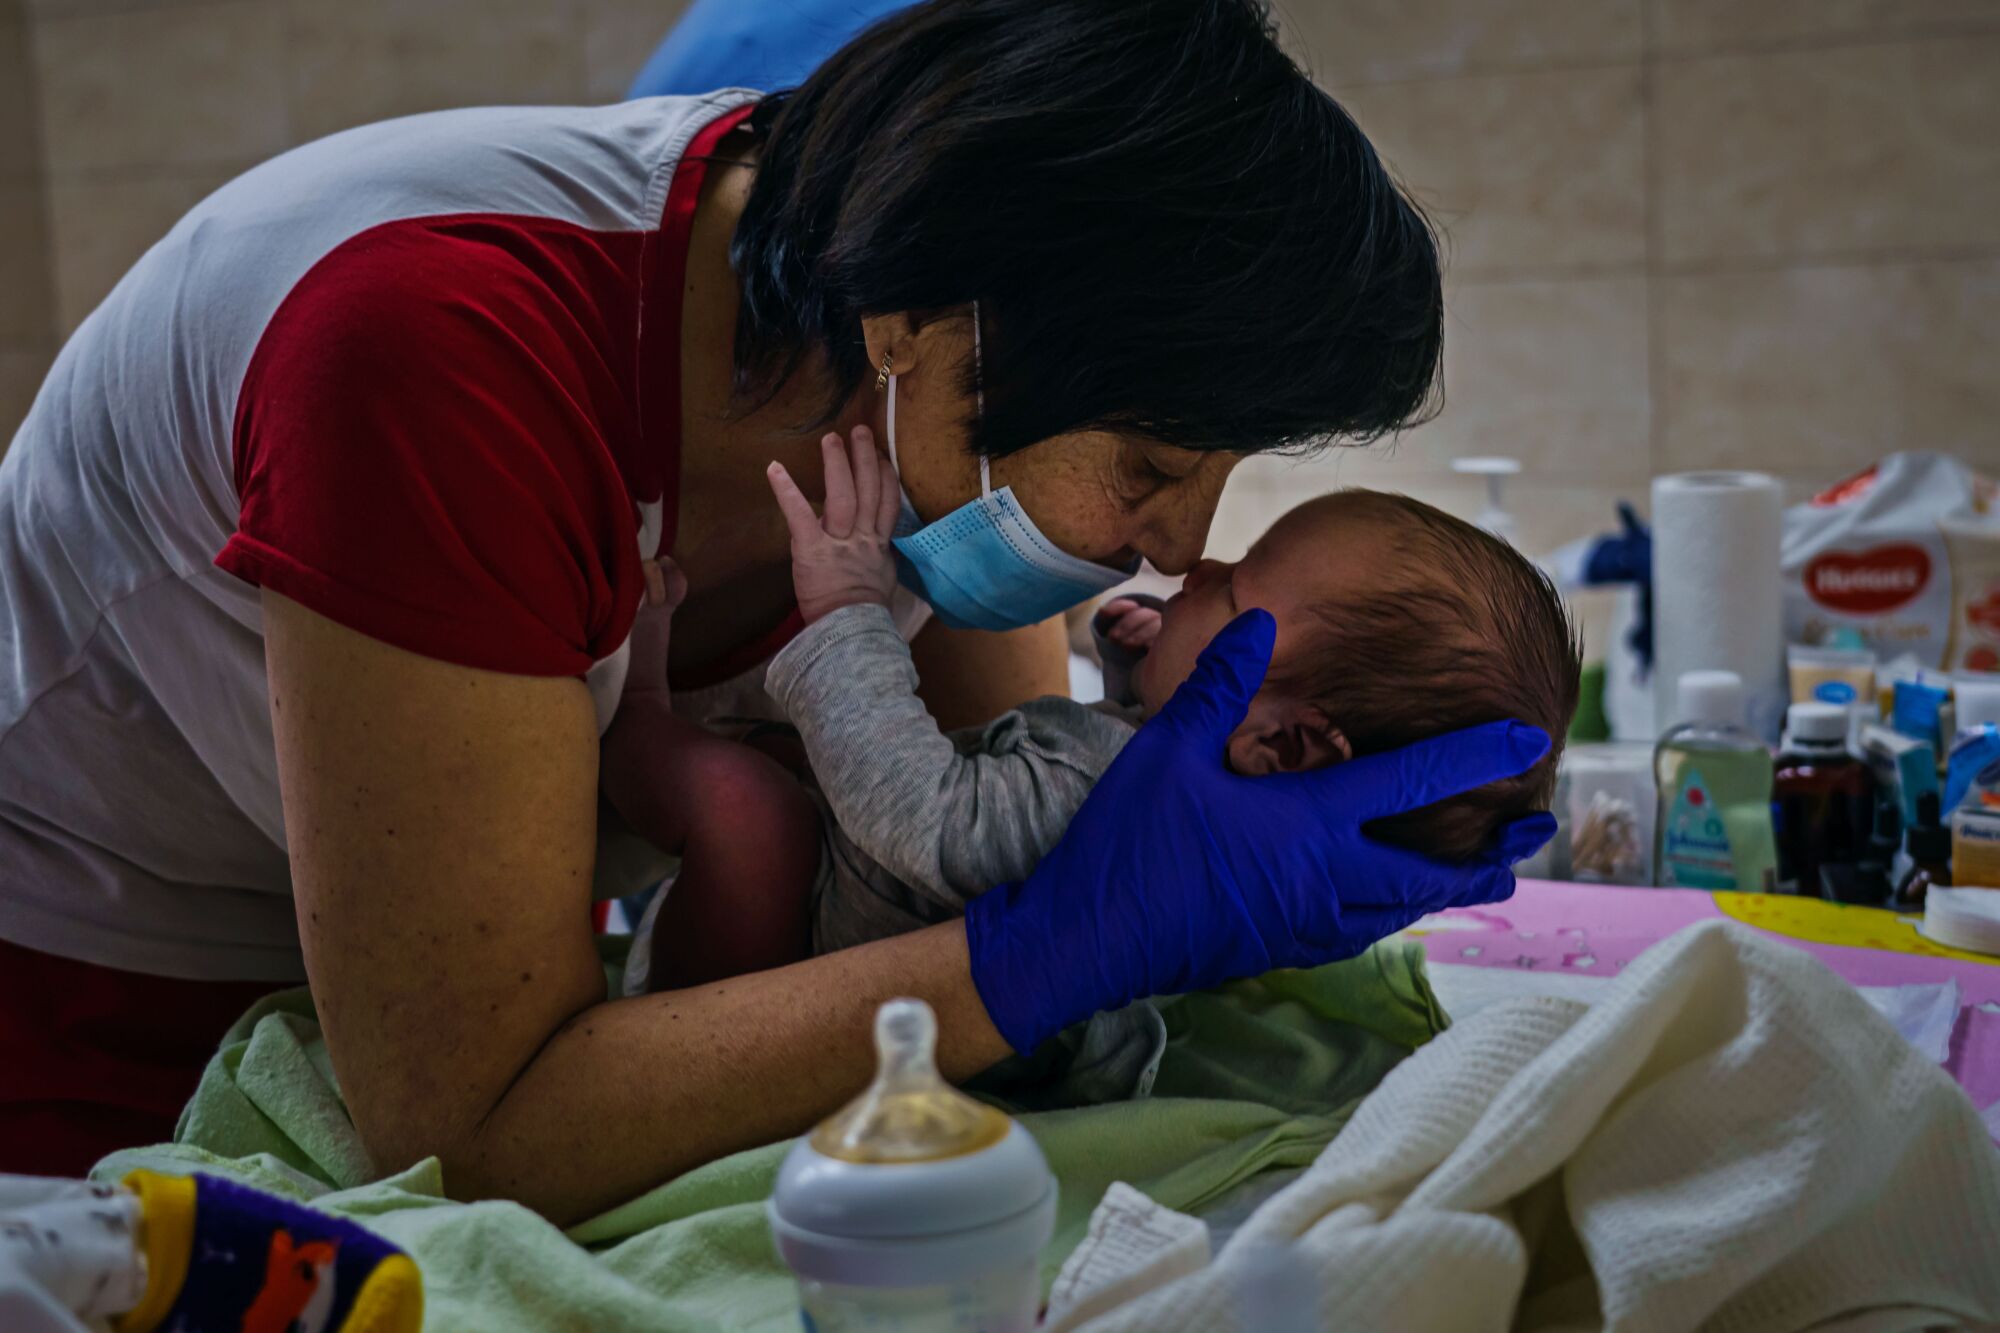 Nursing staff Svetlana Stetsiuk, tries to comfort an infant by rubbing their noses together, in a makeshift nursery